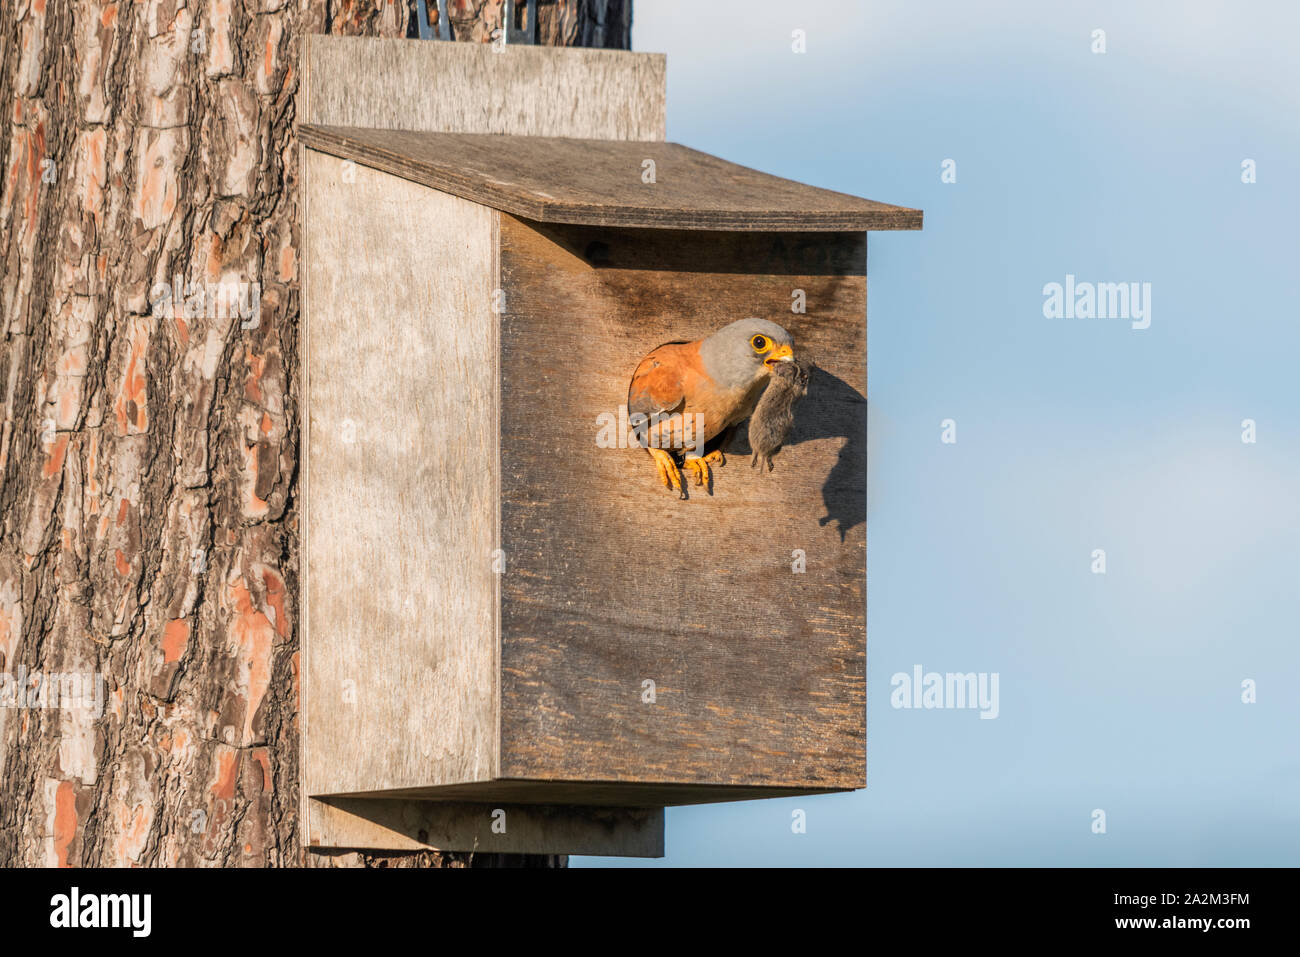 A male lesser kestrel emerges from the nest box with a prey vole in its beak Stock Photo